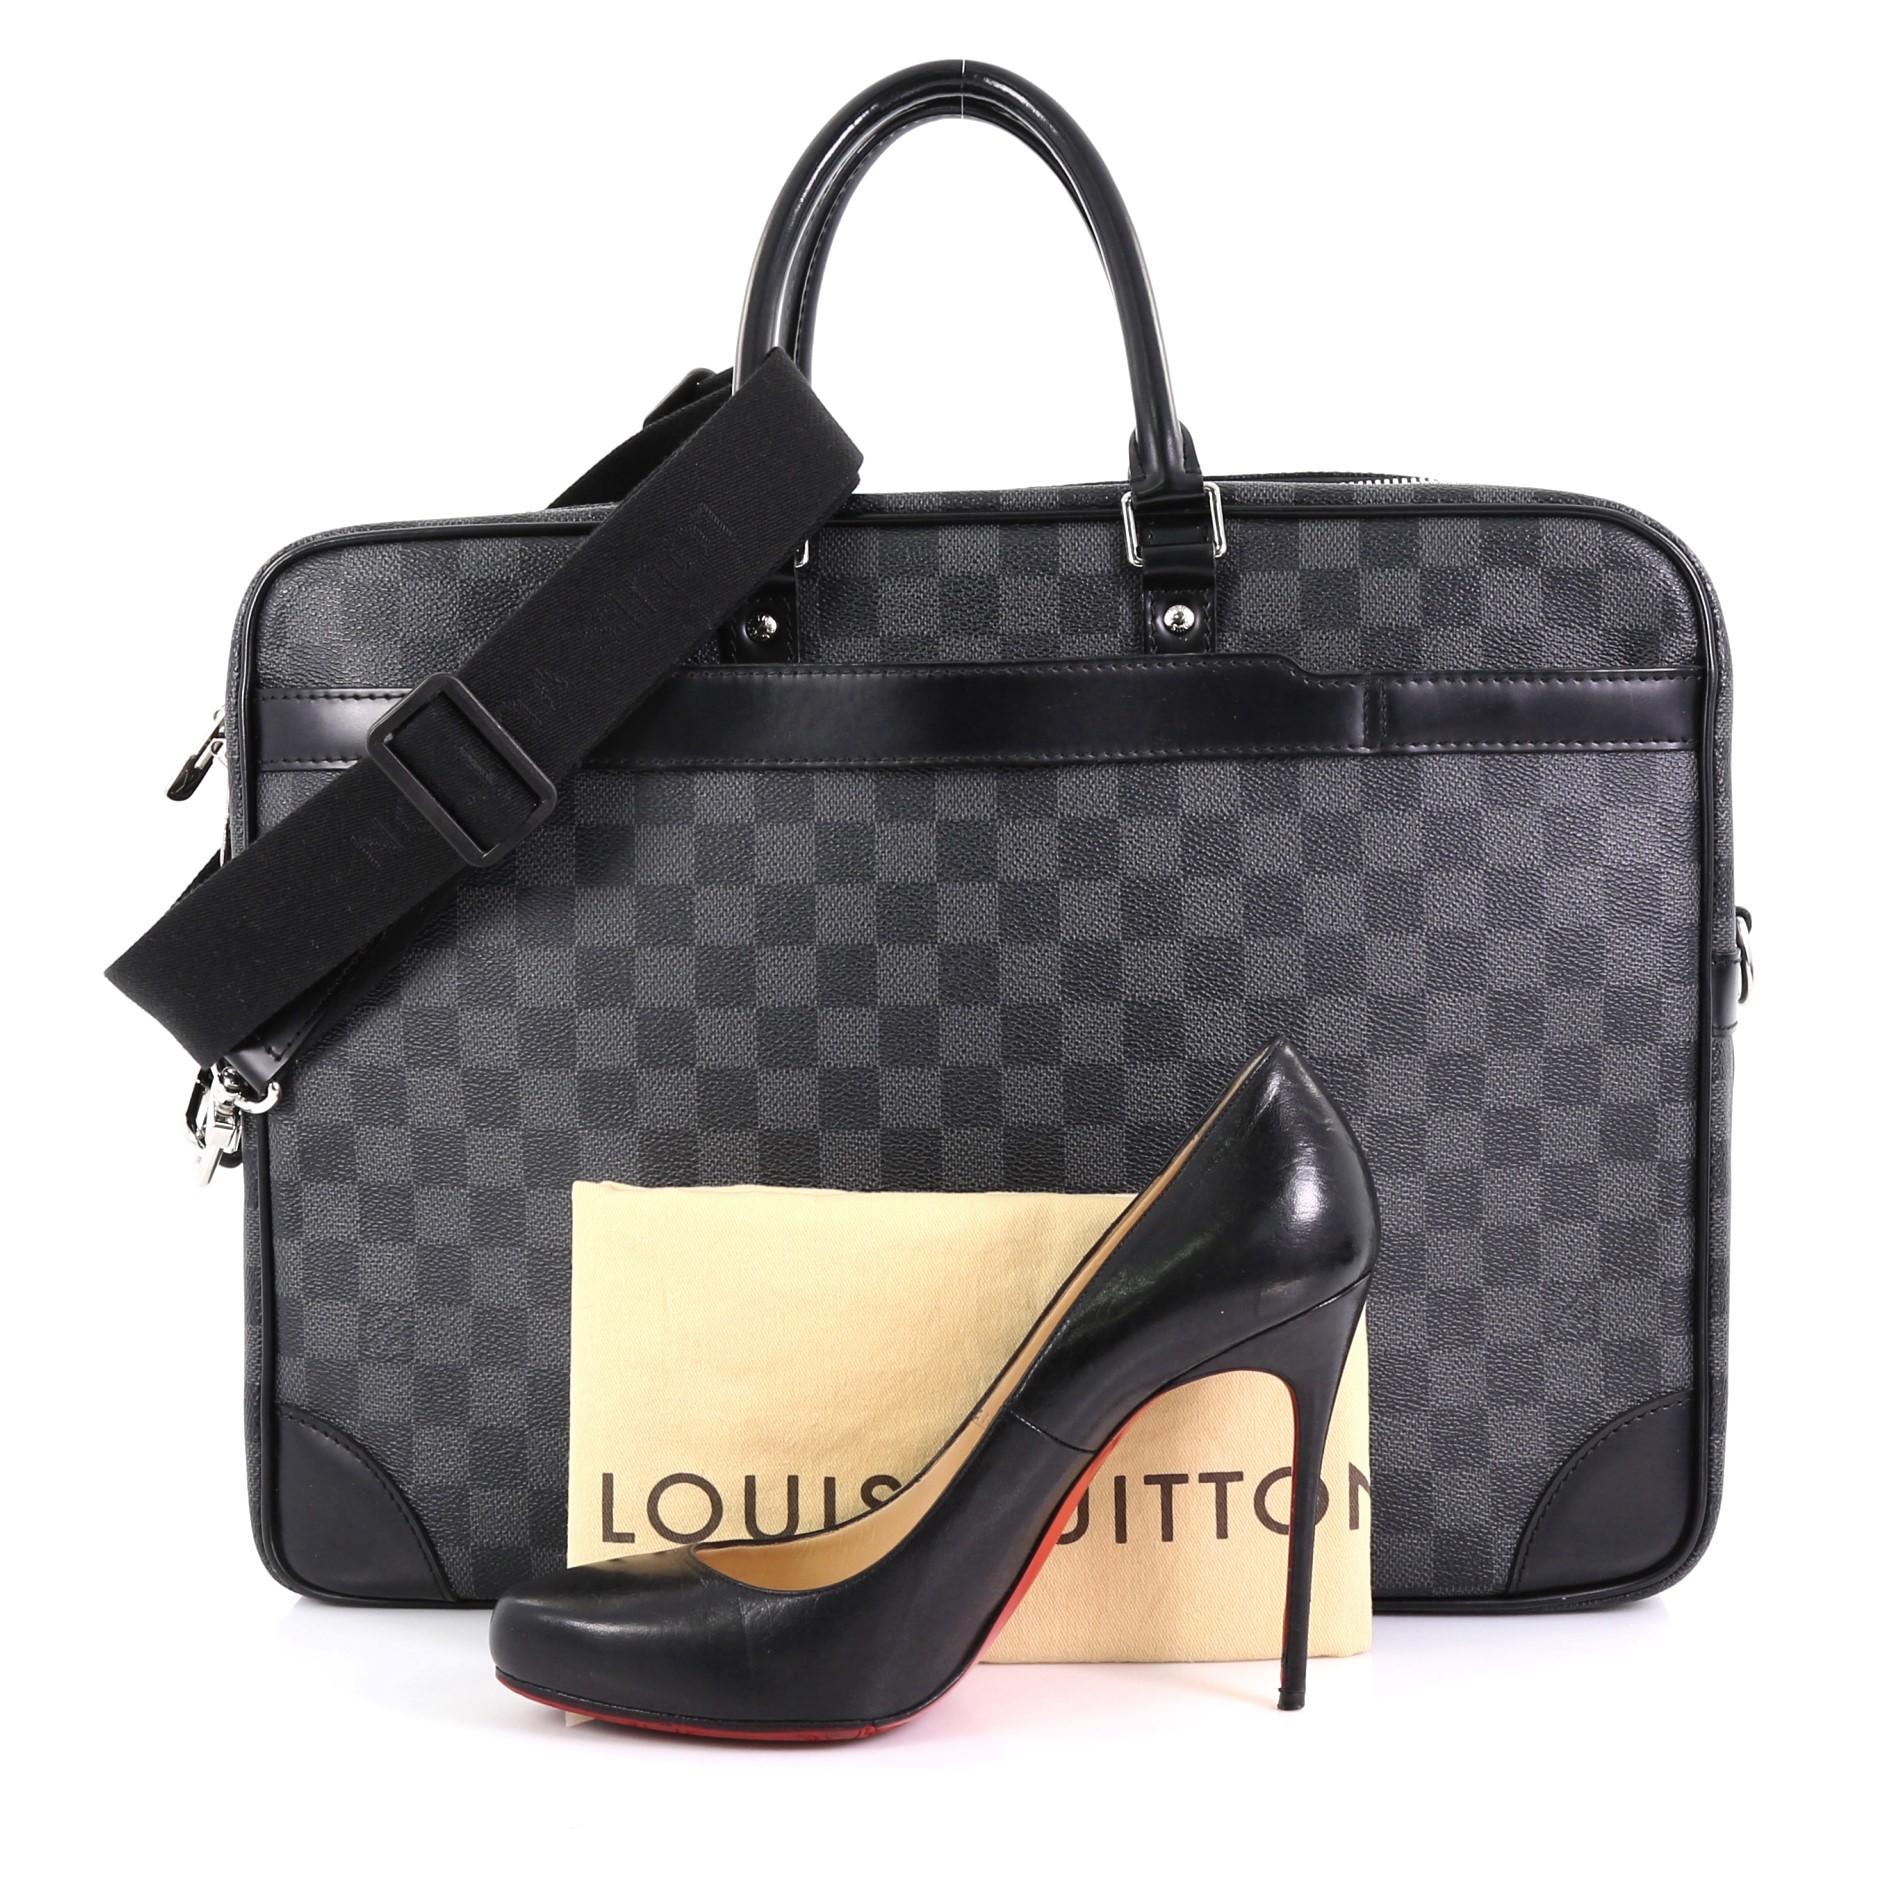 This Louis Vuitton Porte-Documents Voyage Briefcase Damier Graphite GM, crafted from damier graphite coated canvas, features dual rolled handles, black leather trim, and silver-tone hardware. Its top zip closure opens to a black fabric interior with